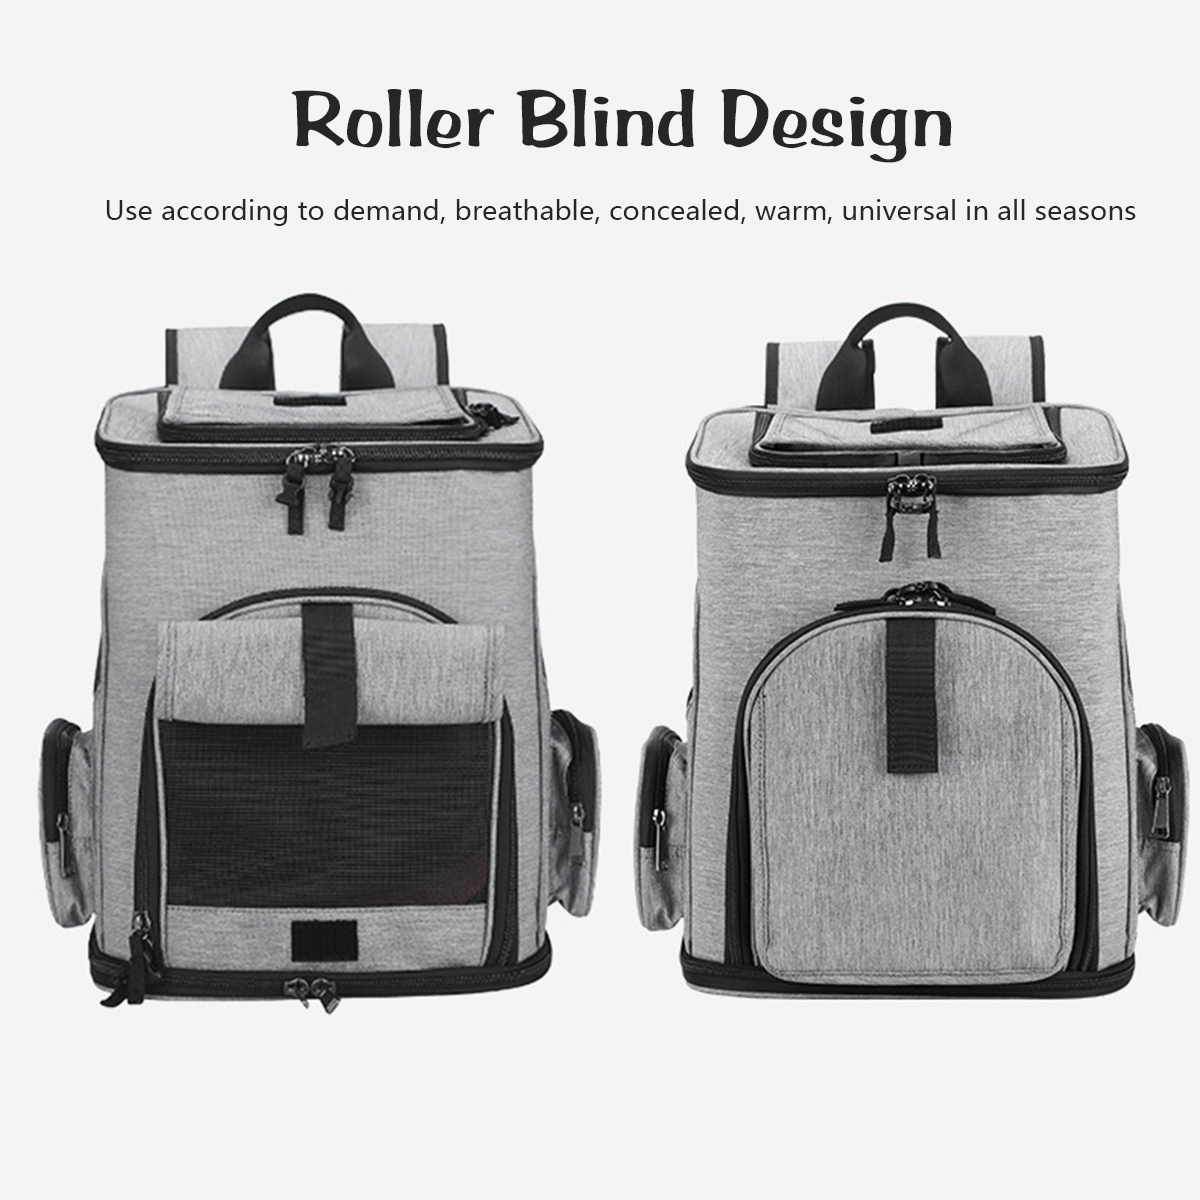 Pet-Carrier-Backpack-Breathable-Puppy-Travel-Space-Shoulder-Bag-Dog-Cat-Outdoor-Double-sided-cushion-1925739-3